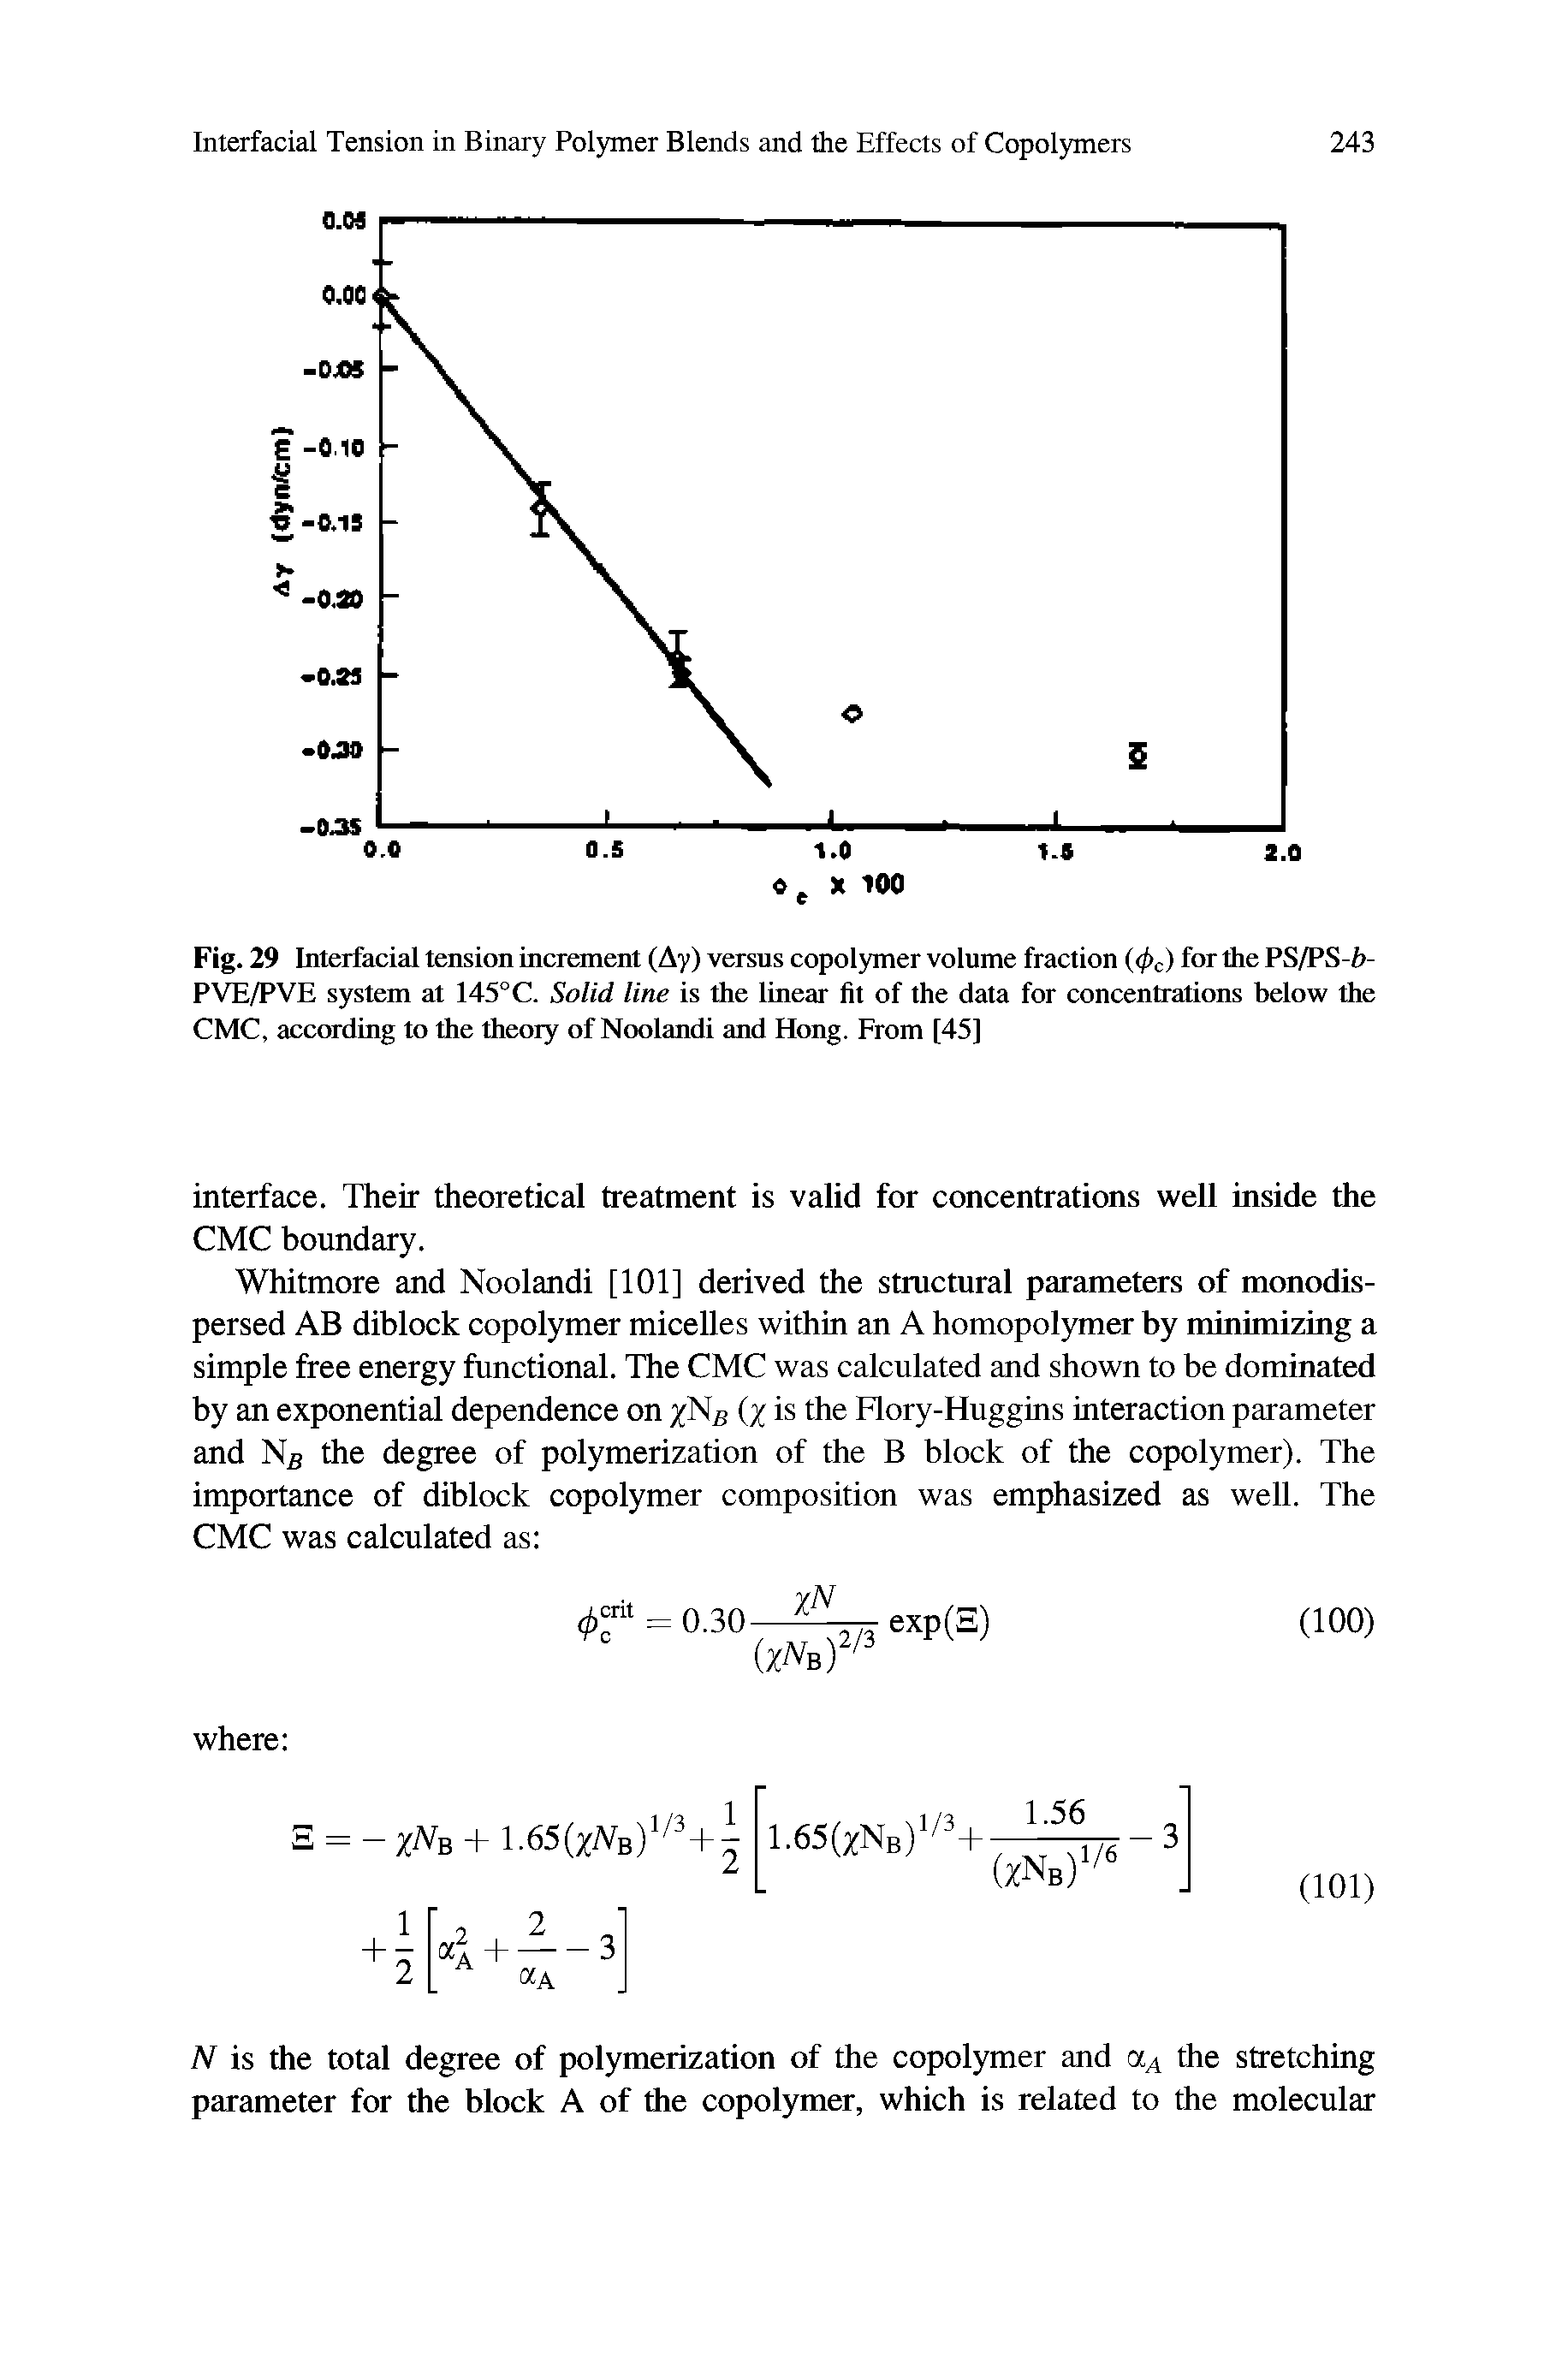 Fig. 29 Interfacial tension increment (Ay) versus copolymer volume fraction <j>c) for the PS/PS-h-PVE/PVE system at 145°C. Solid line is the linear fit of the data for concentrations below the CMC, according to the theory of Noolandi and Hong. From [45]...